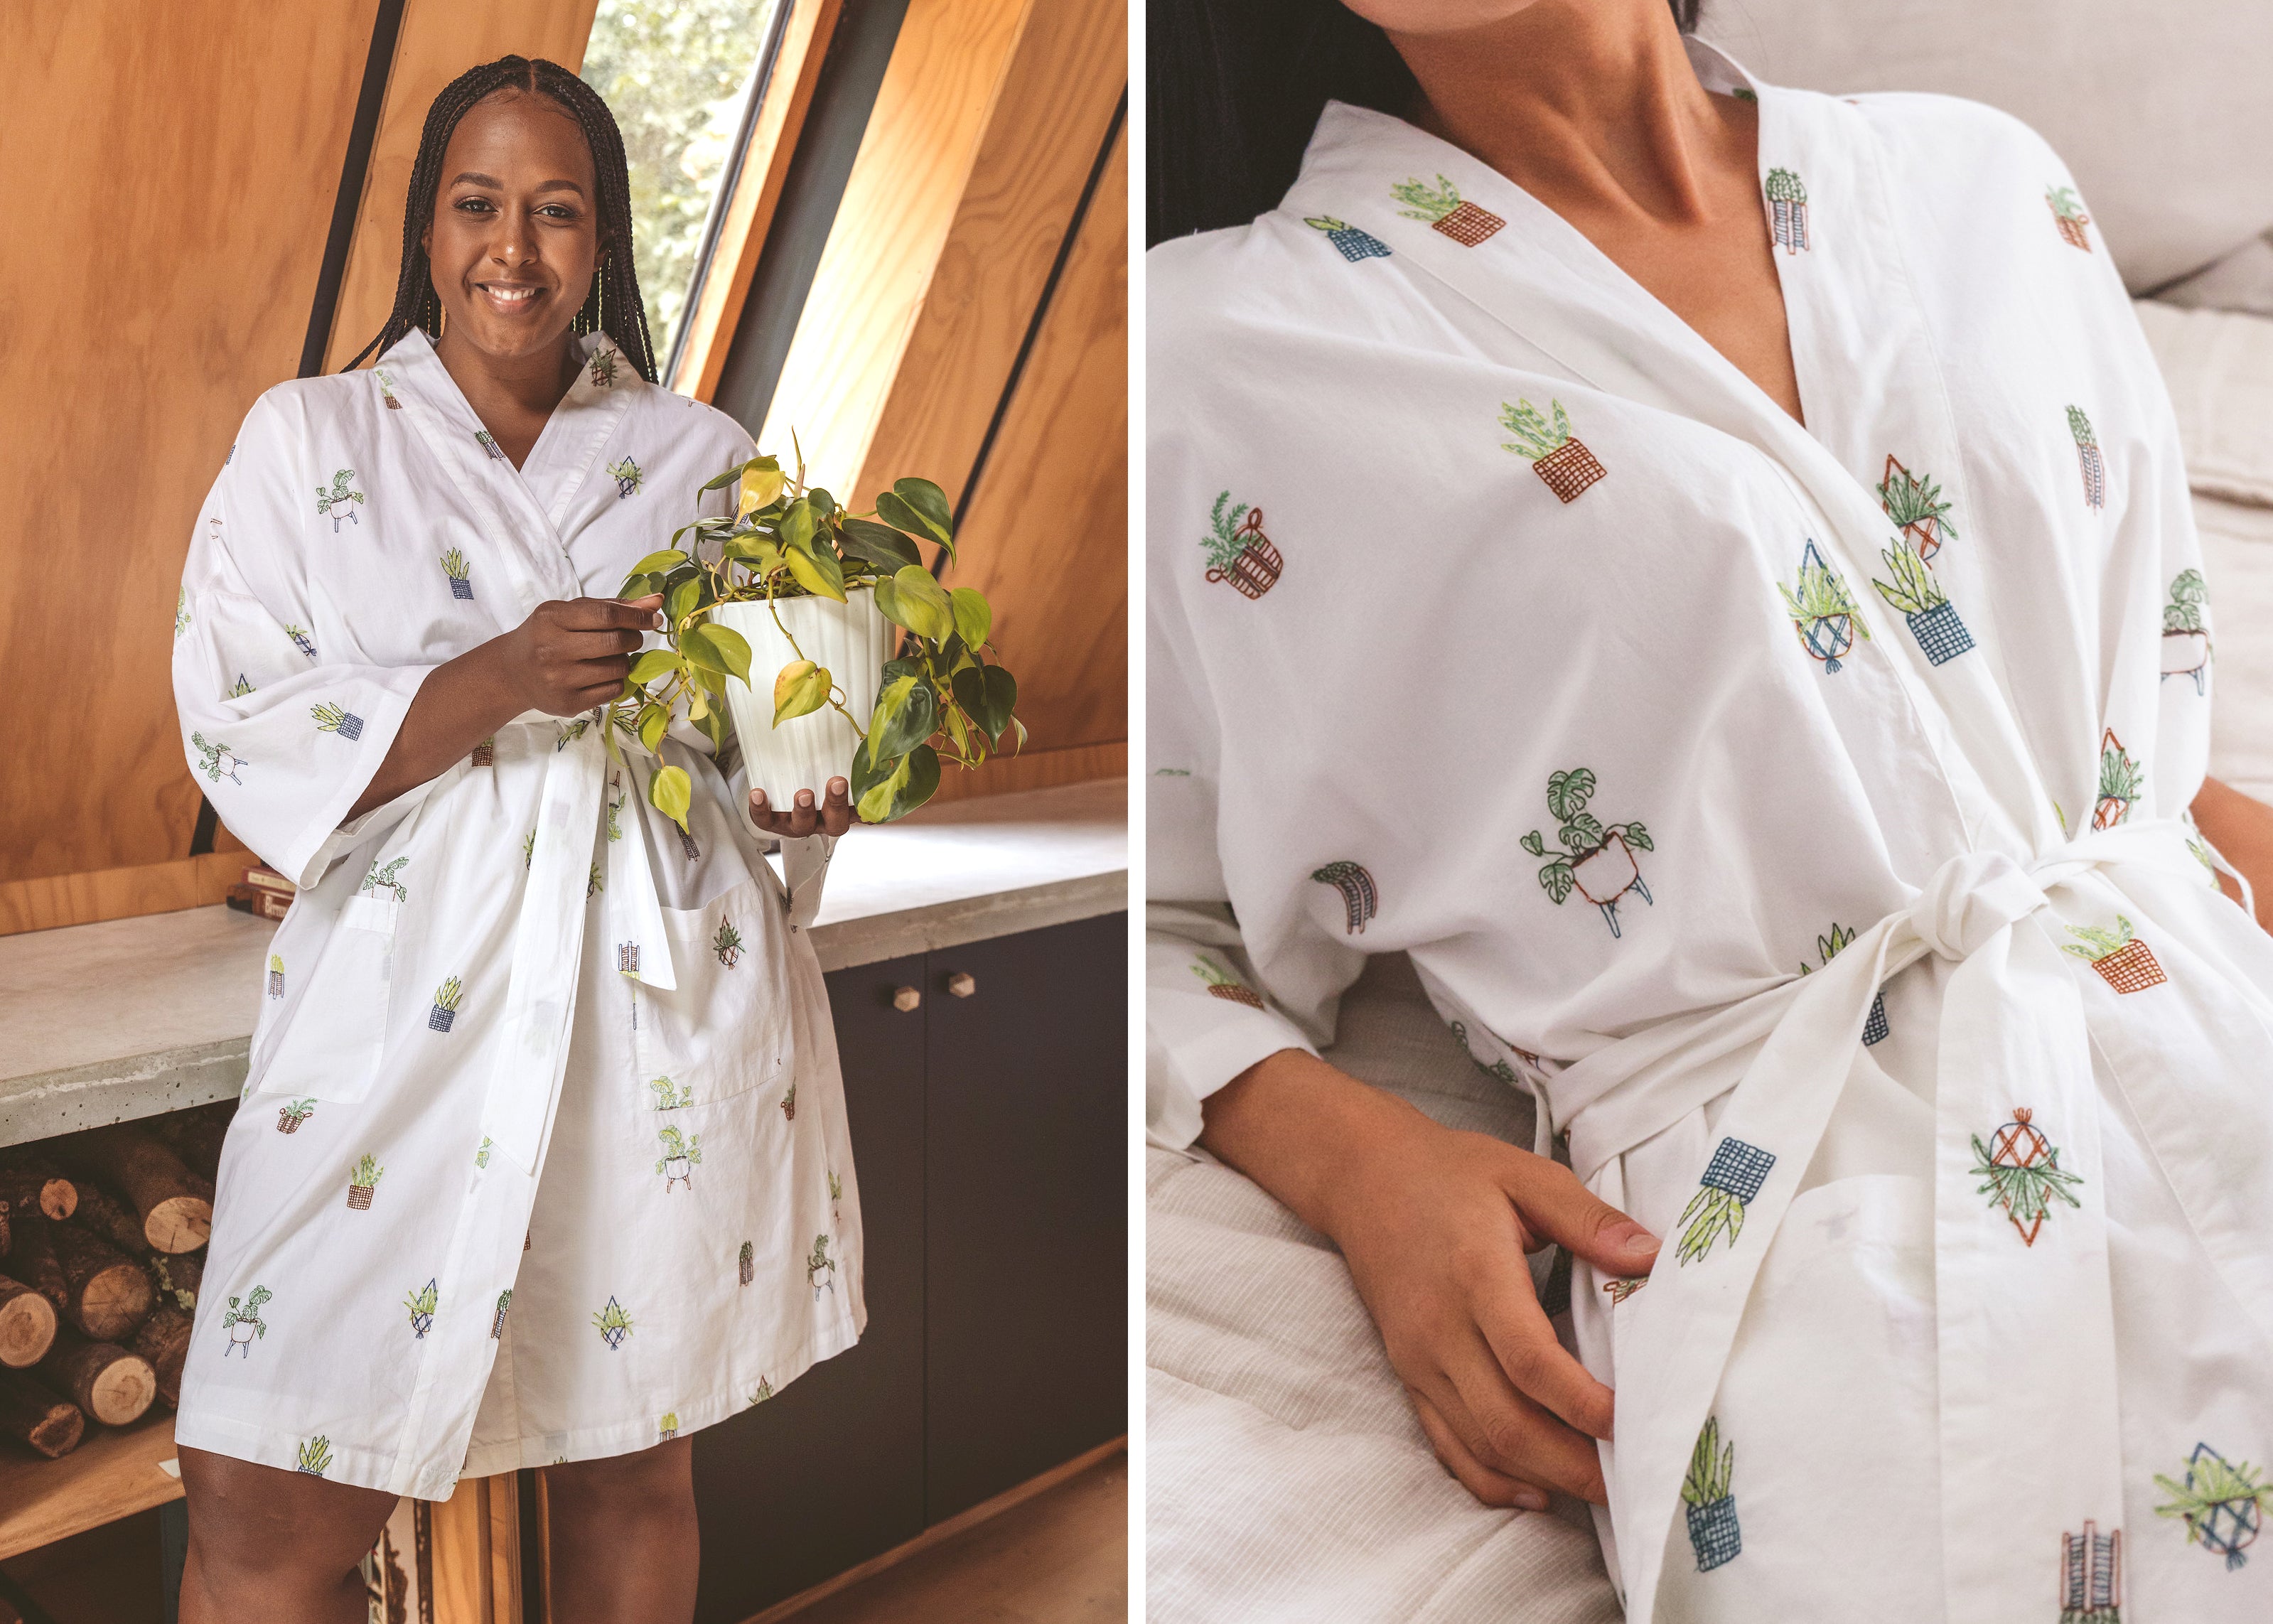 Ronnie wears our Embroidered Houseplants Short Robe in 2X, and Lynn wears S/M